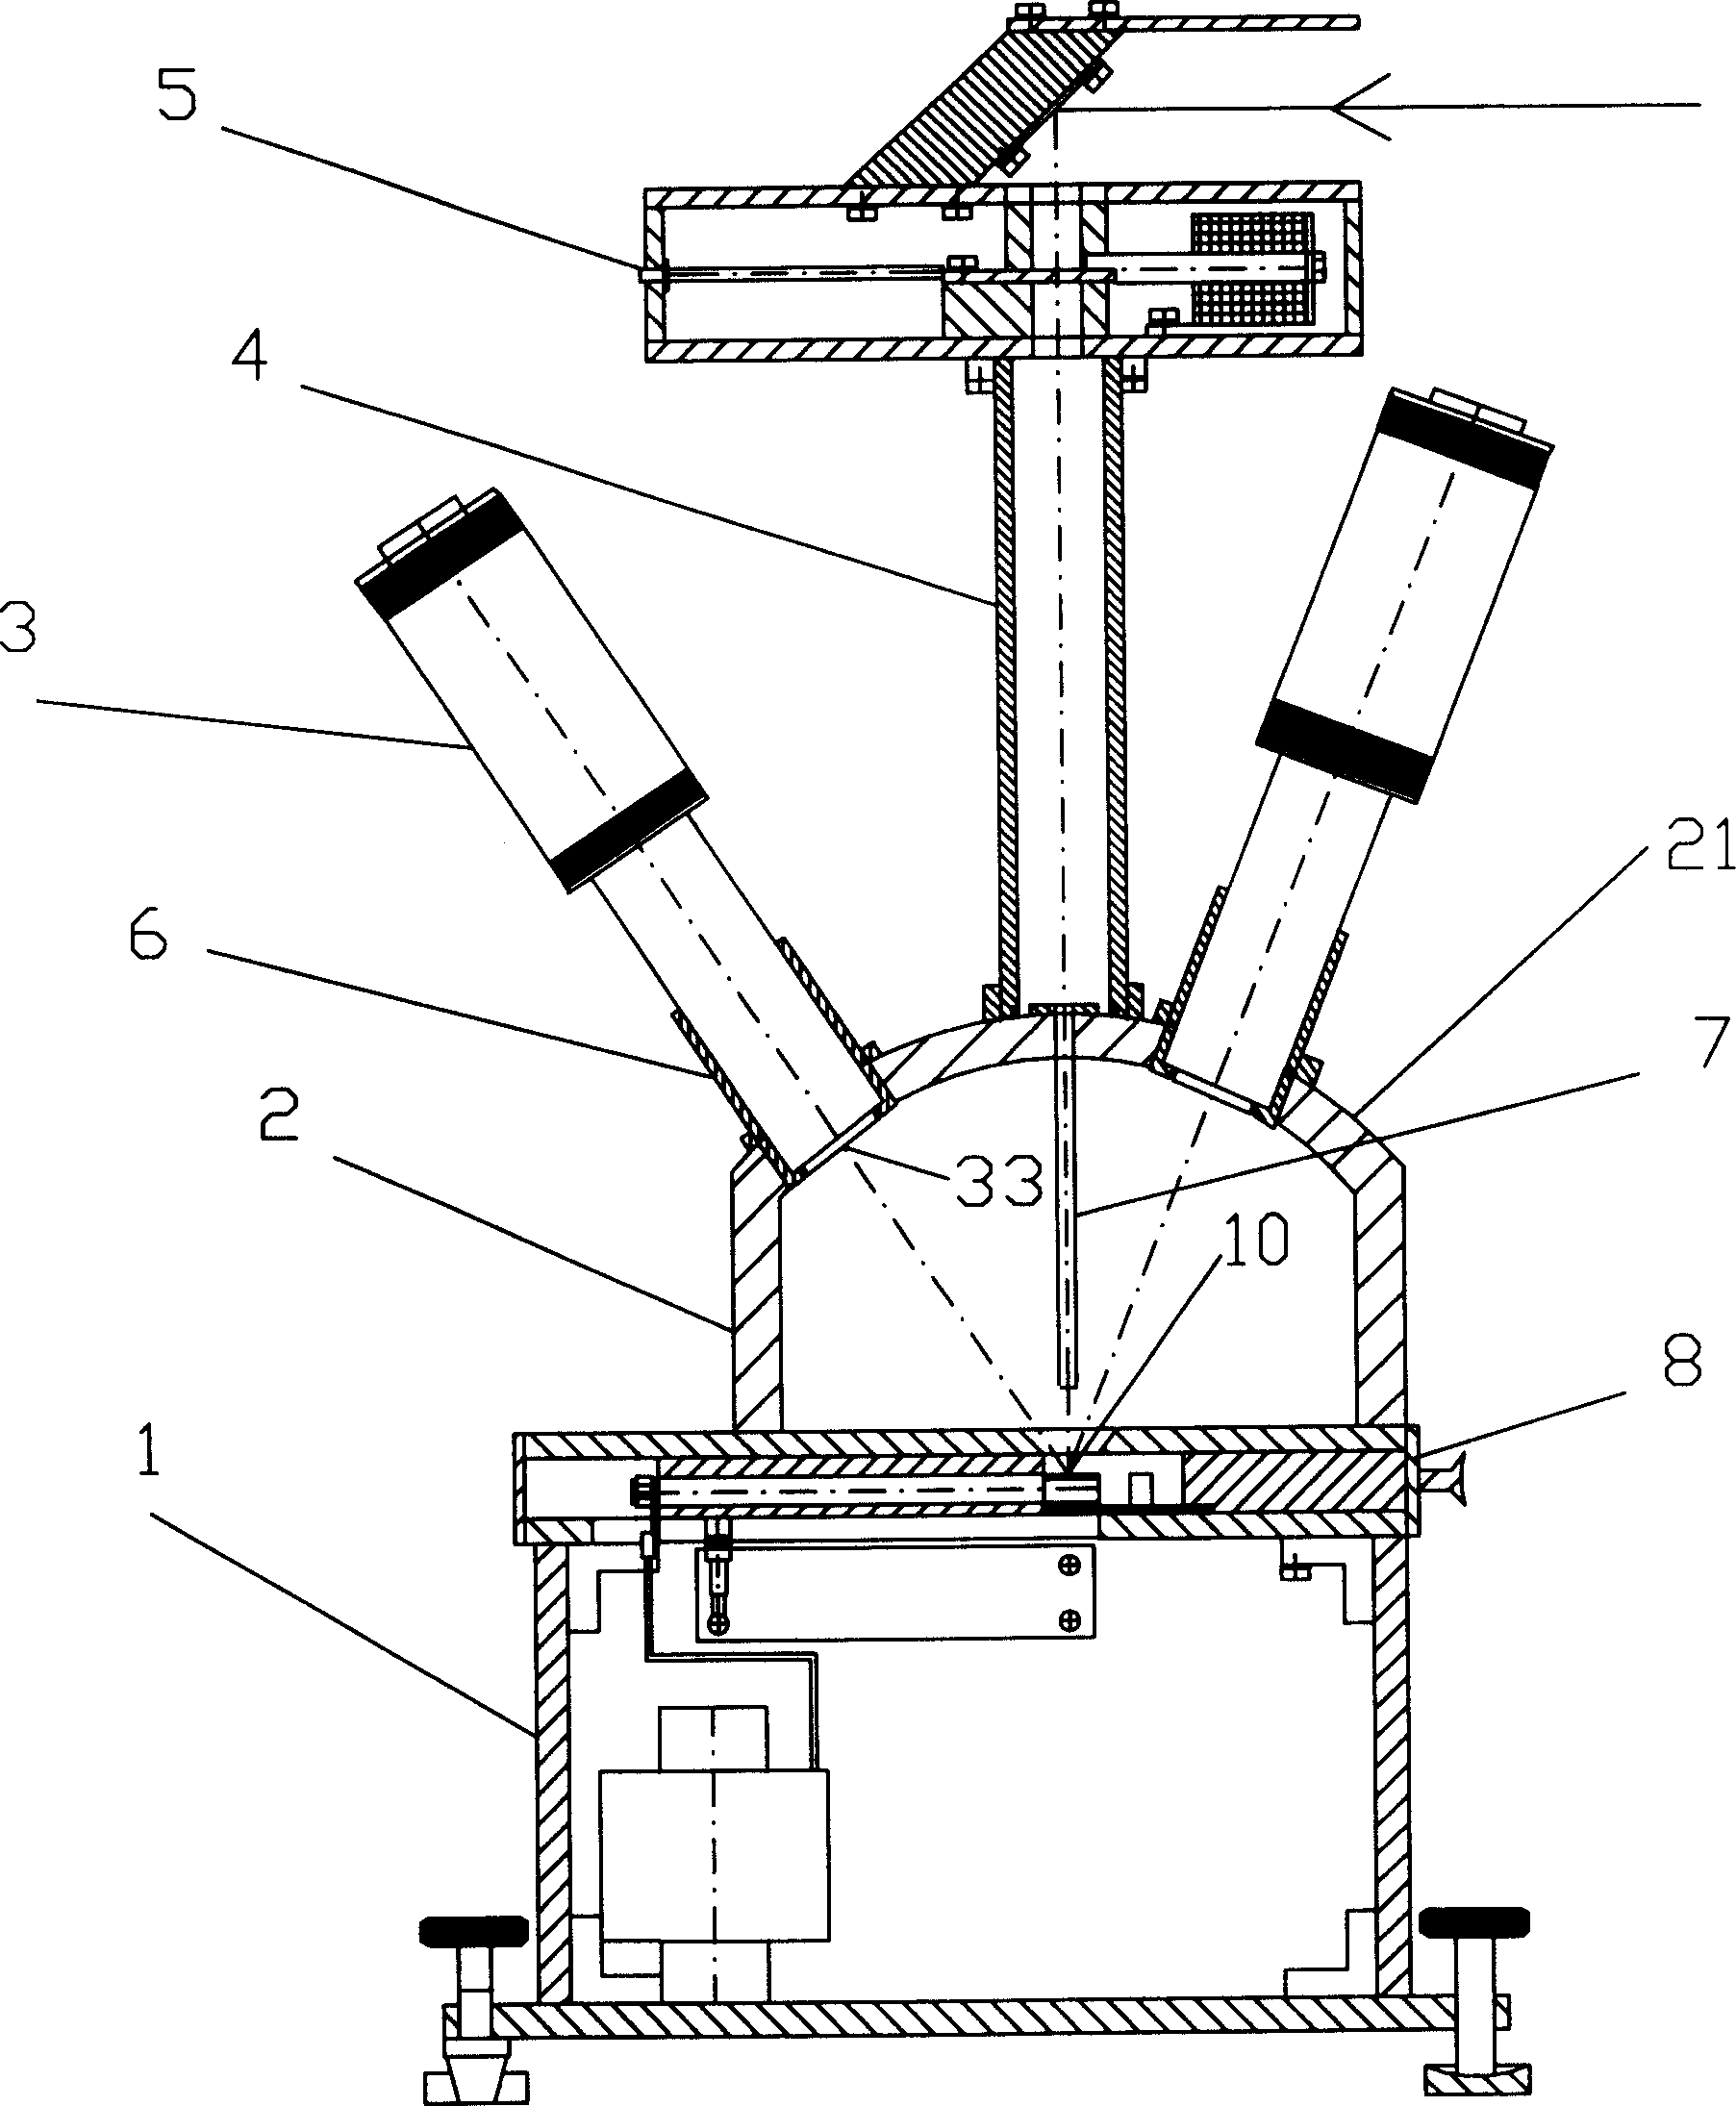 Light releasing photon frequency division spectrometer